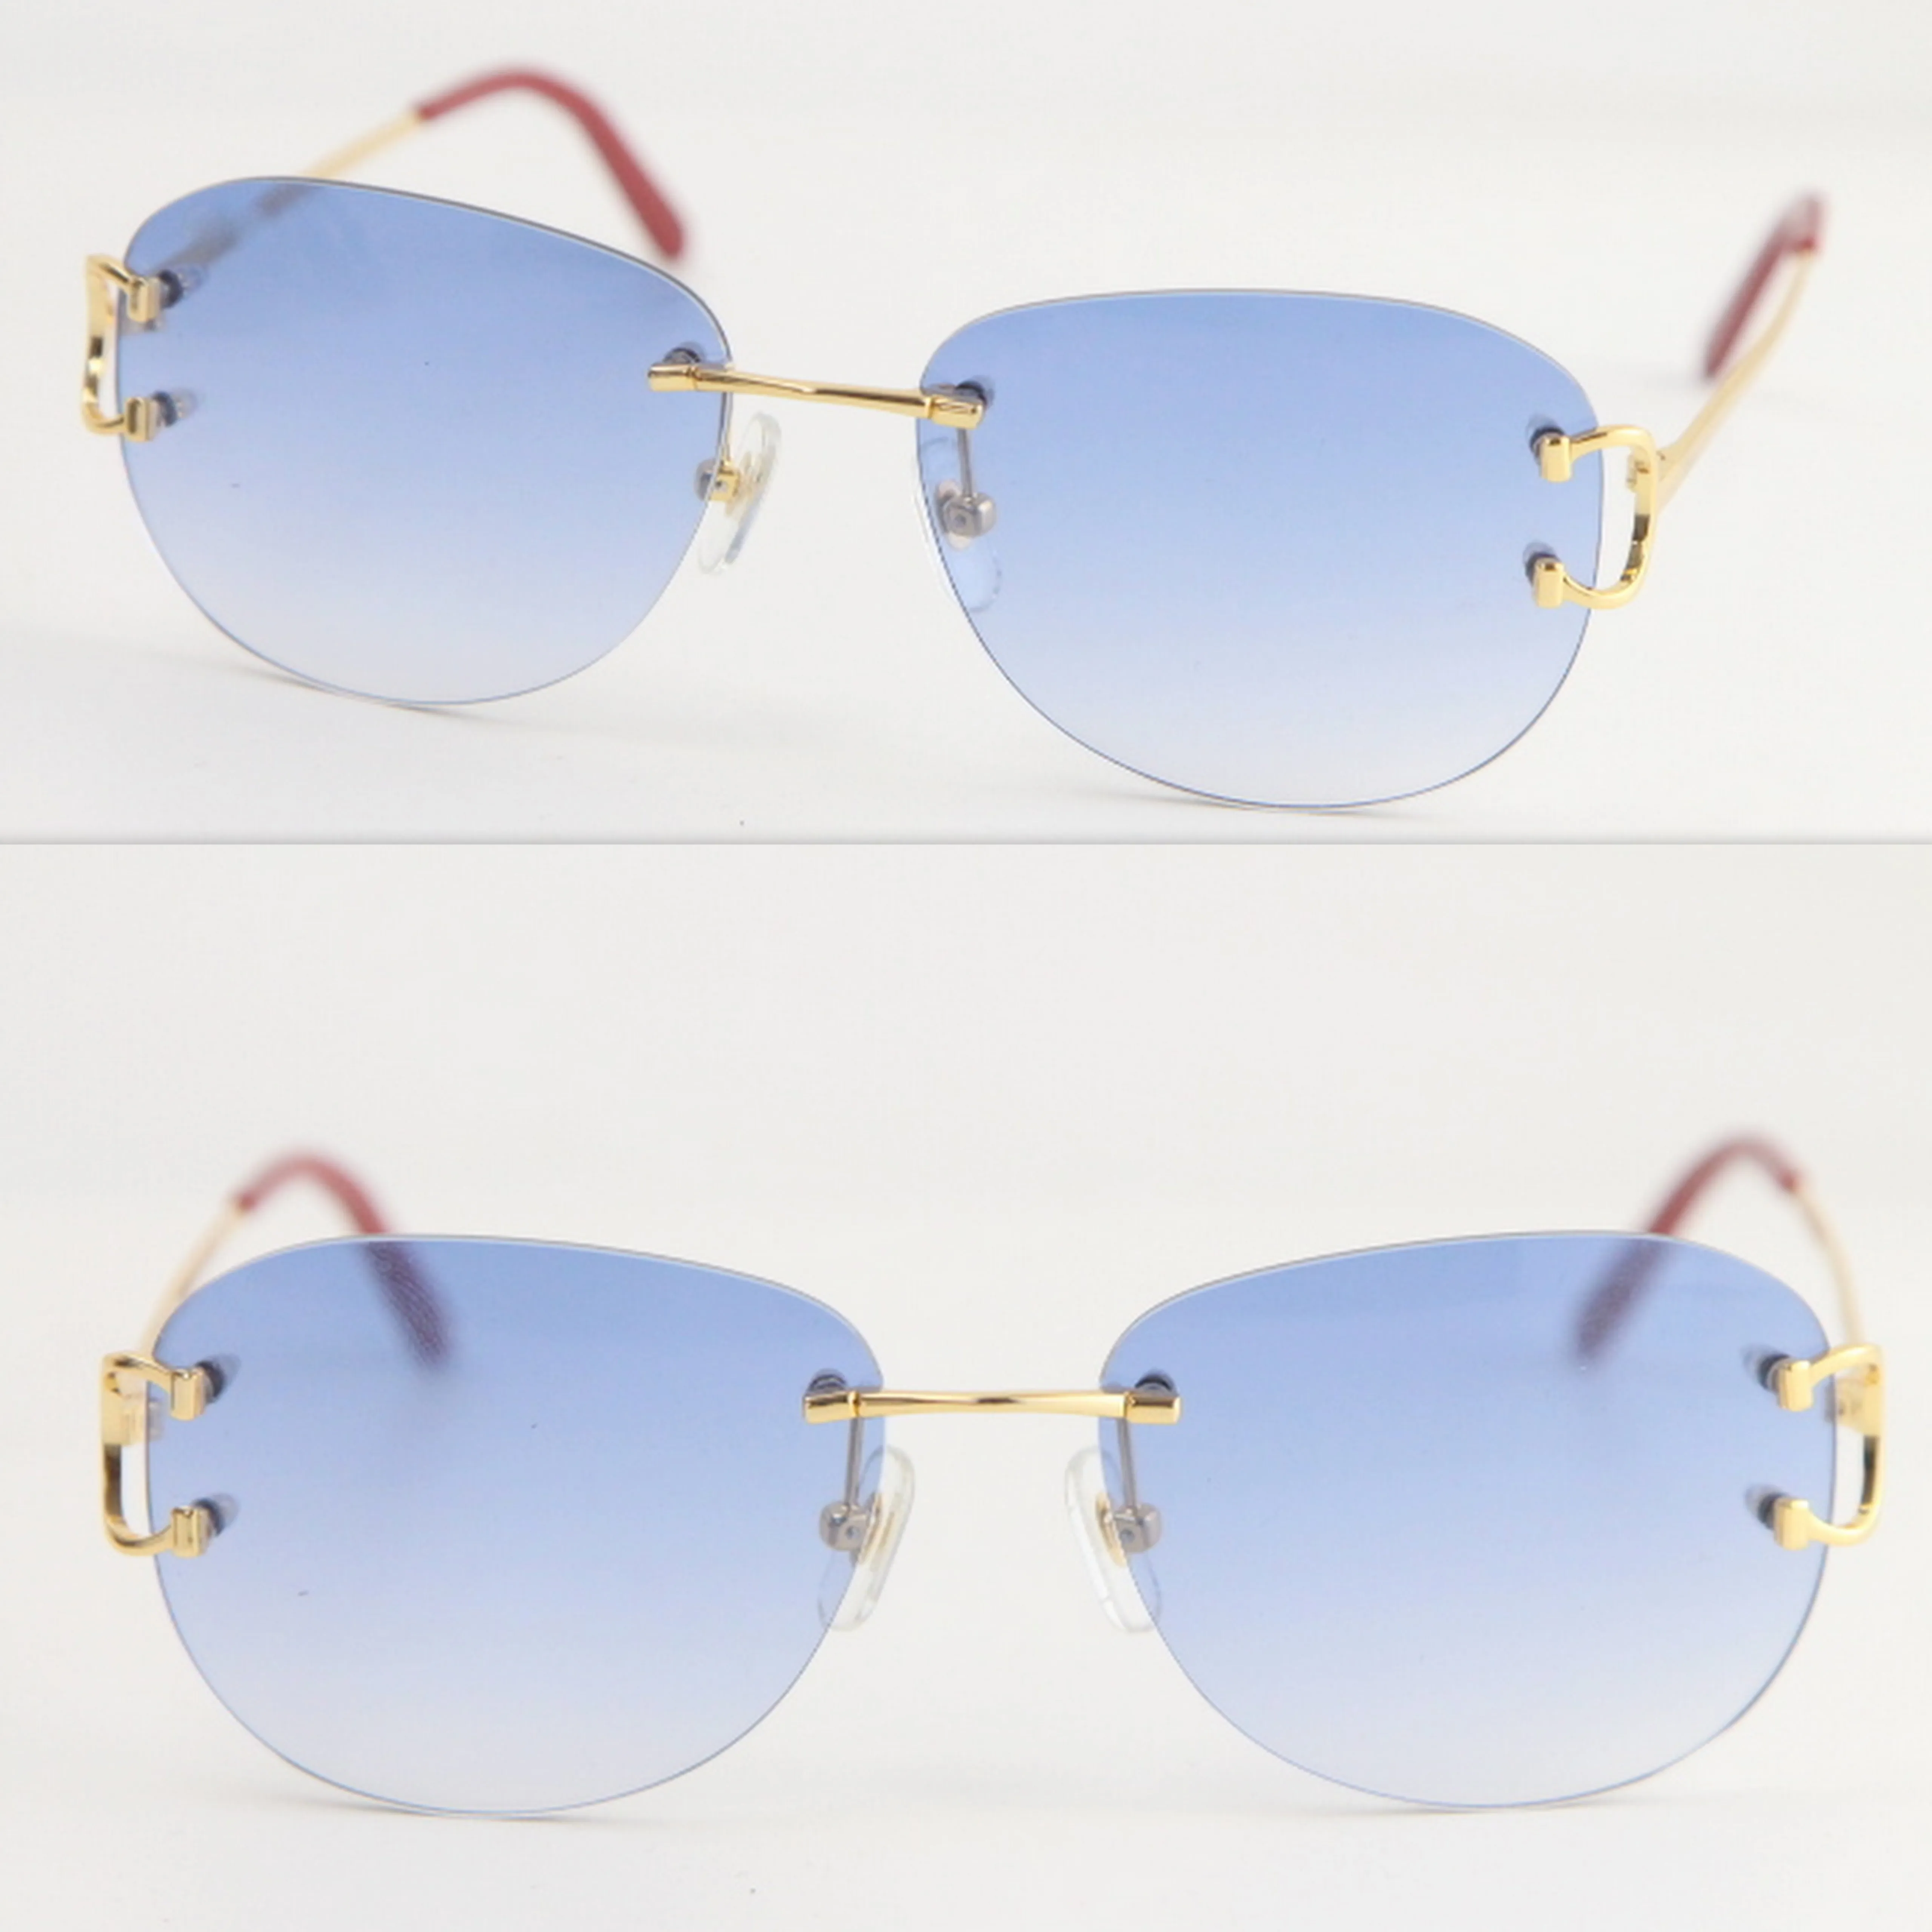 Whole Selling UV400 Protection 4193828 Rimless Sunglasses fashion men Woman sport glasses outdoors driving gold metal frame Ey197U